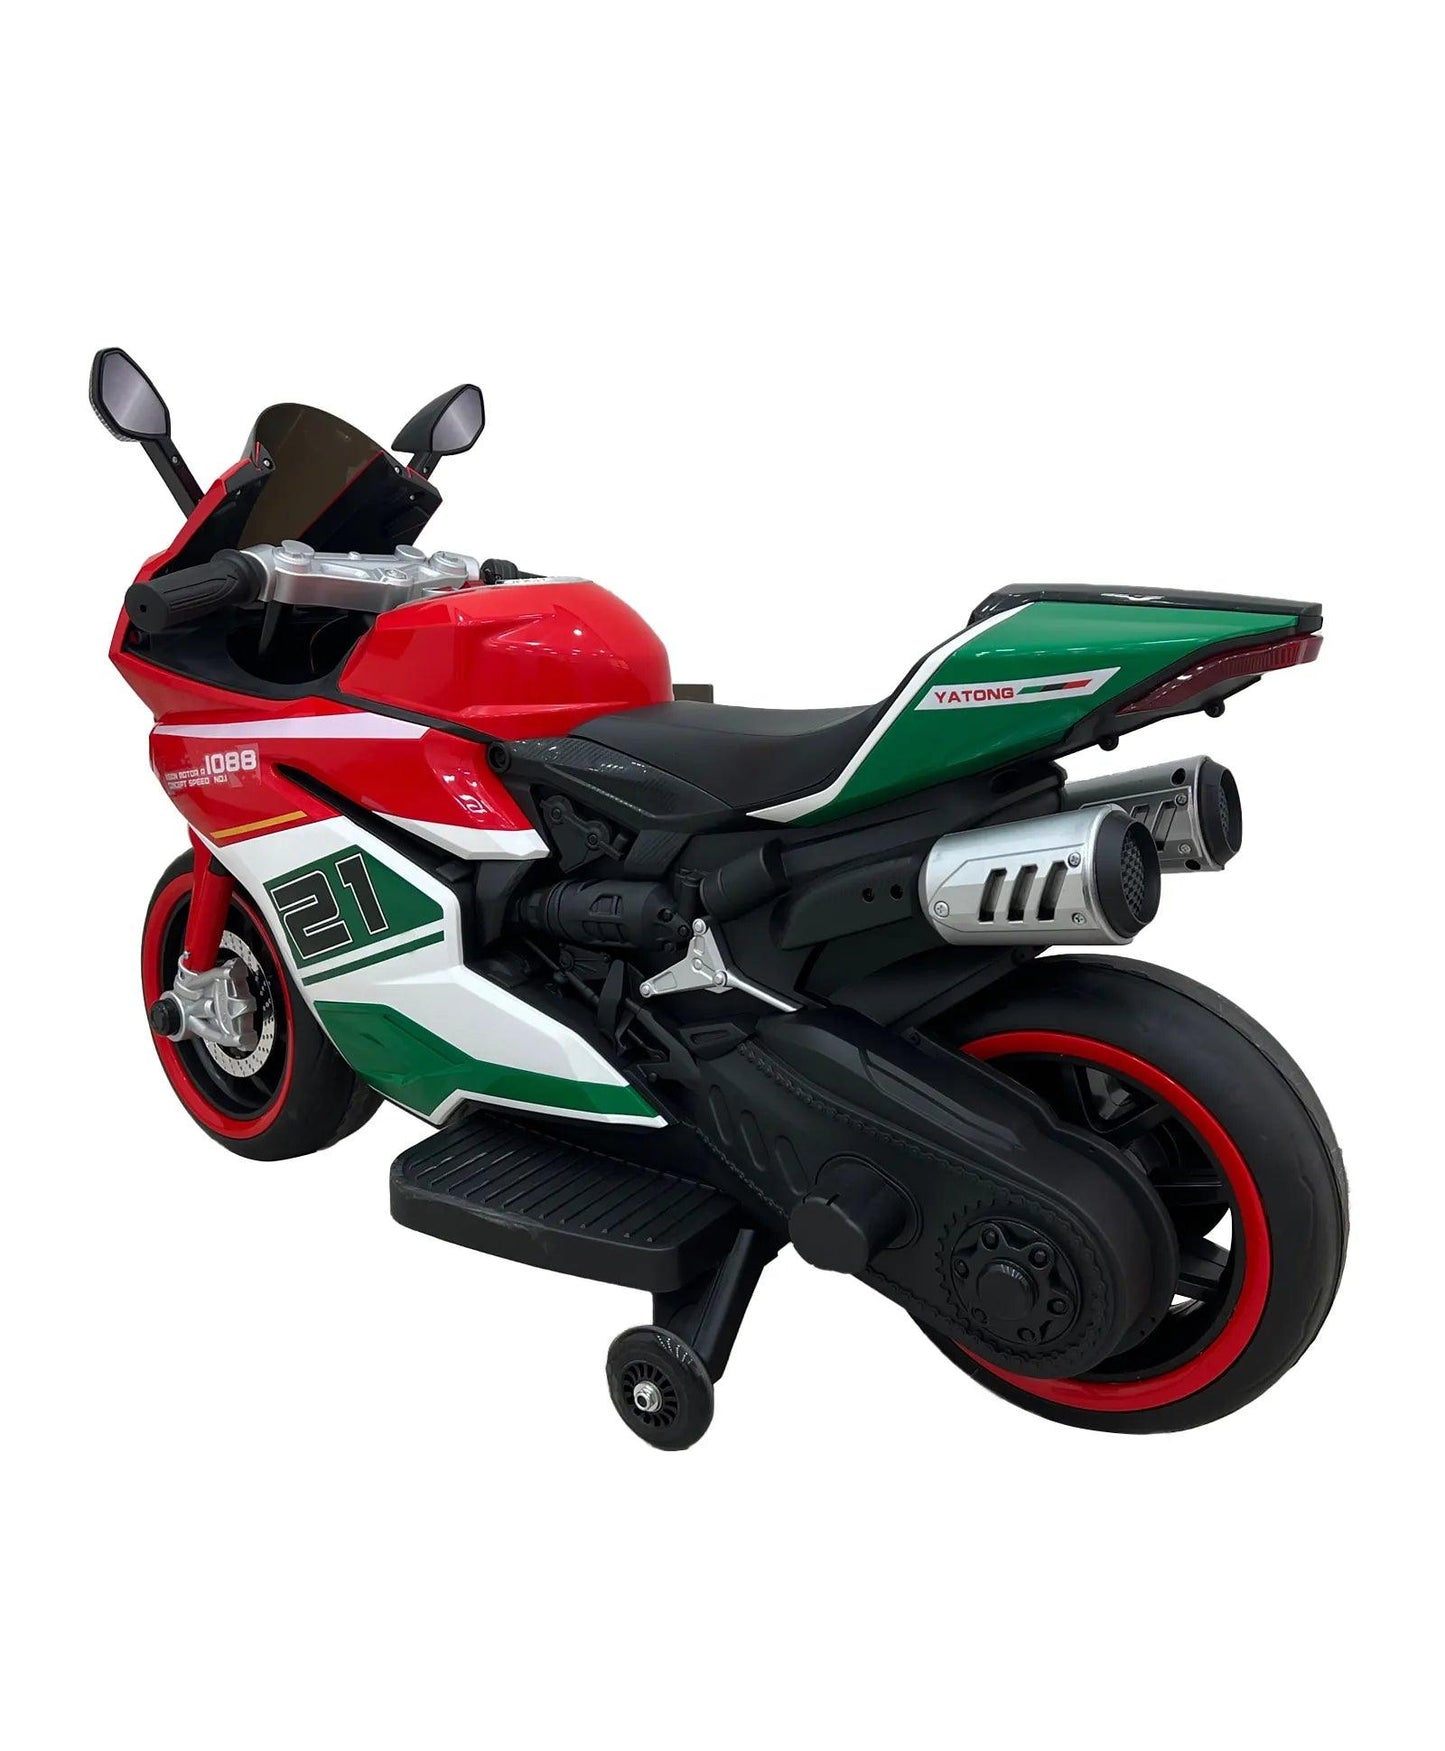 PATOYS | Stylish and Sturdy Battery Operated Ride On Bike - Red - PATOYS